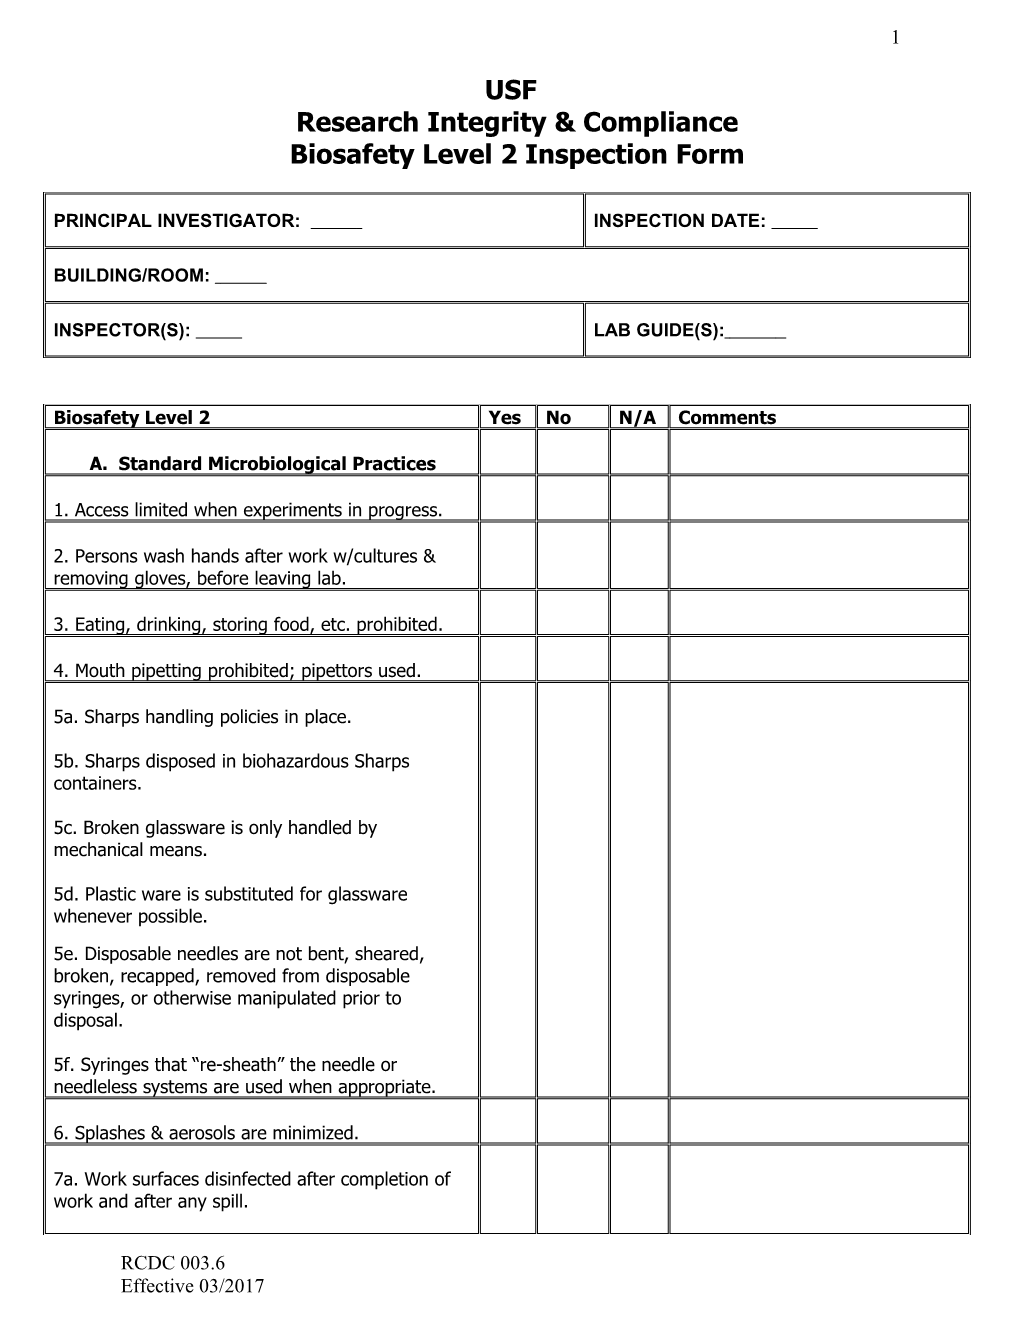 USF- Research Compliance: Biosafety Level 2 Audit Form